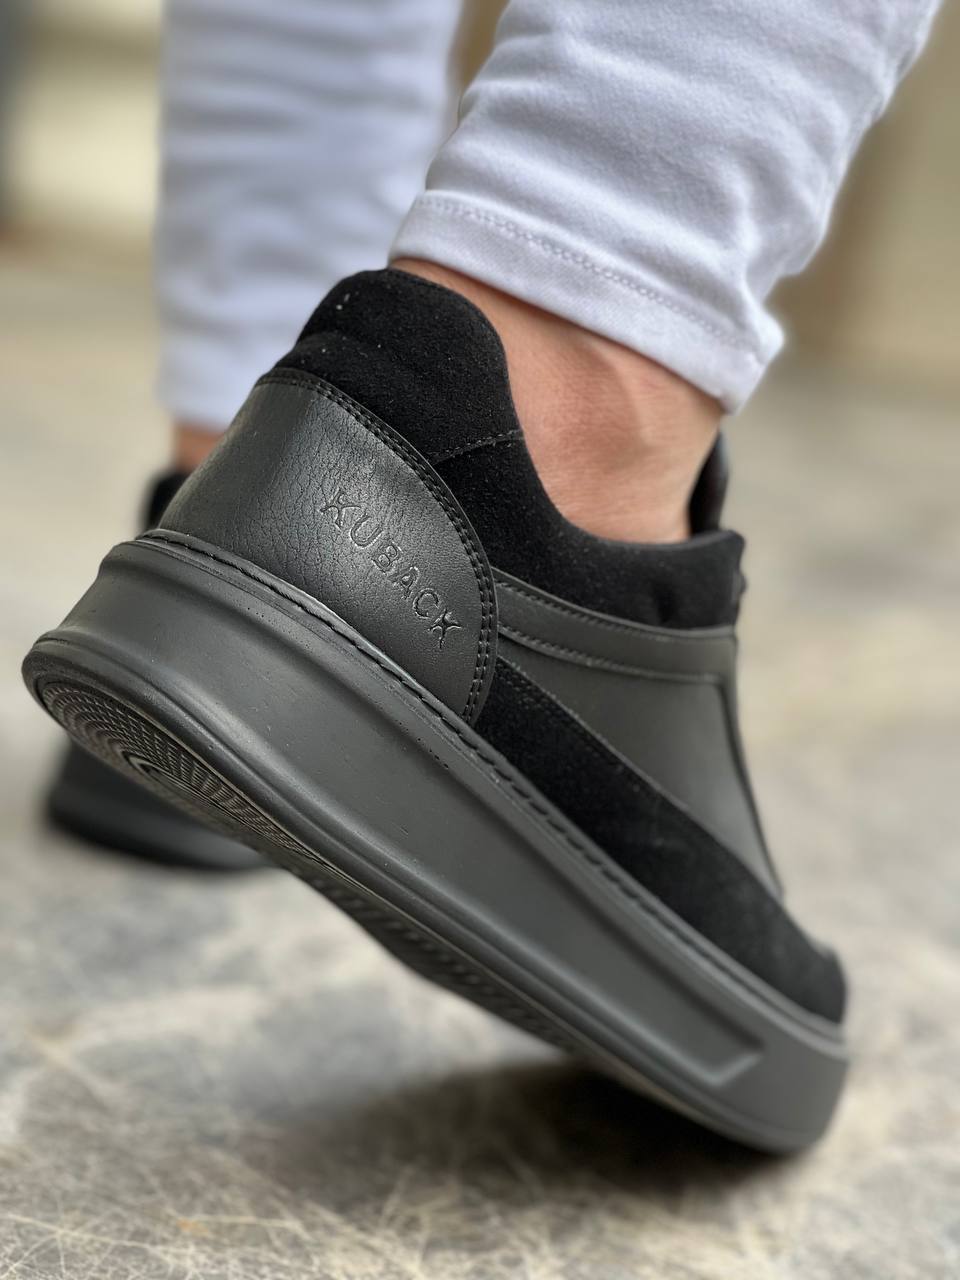 KB-006 Black Skin Black High Sole Laced Casual Men's Shoes - STREETMODE™